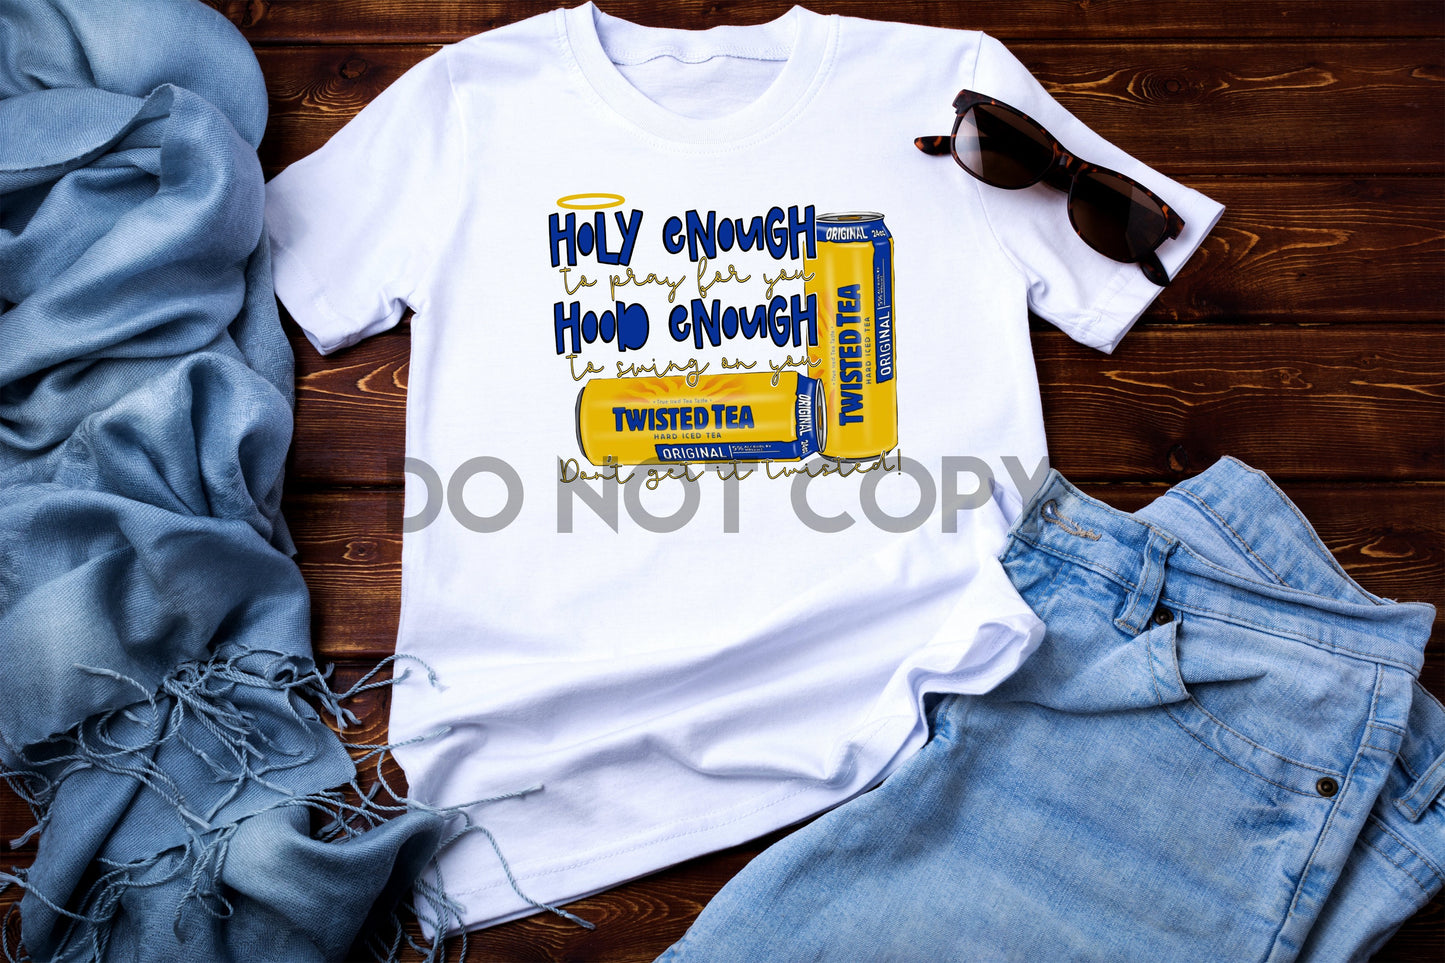 Holy Enough to Pray for You Hood Enough to Swing on You Don't get it Twisted Sublimation print